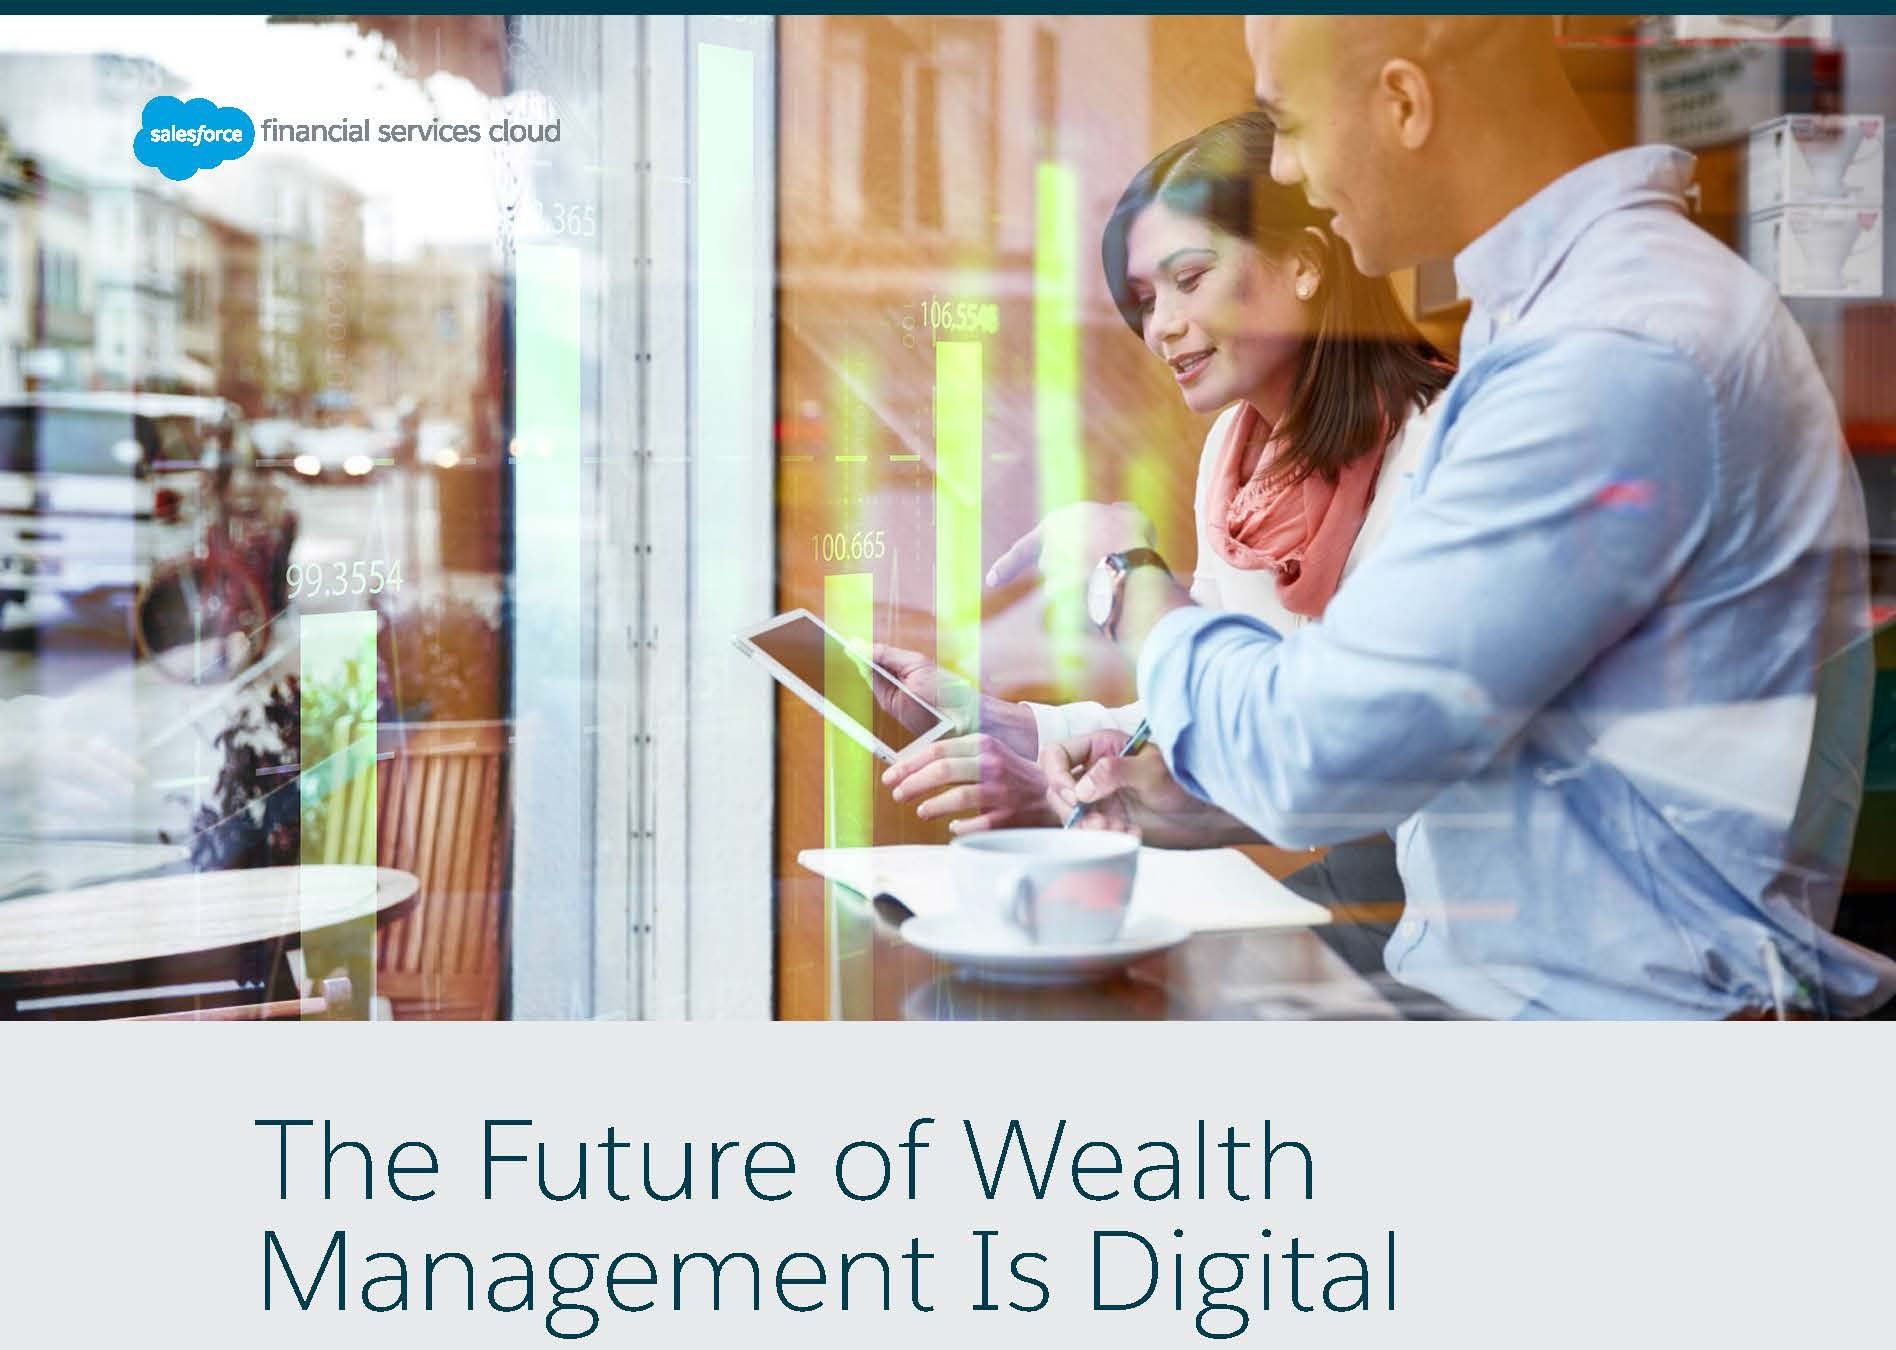 Download 'The Future Of Wealth Management'